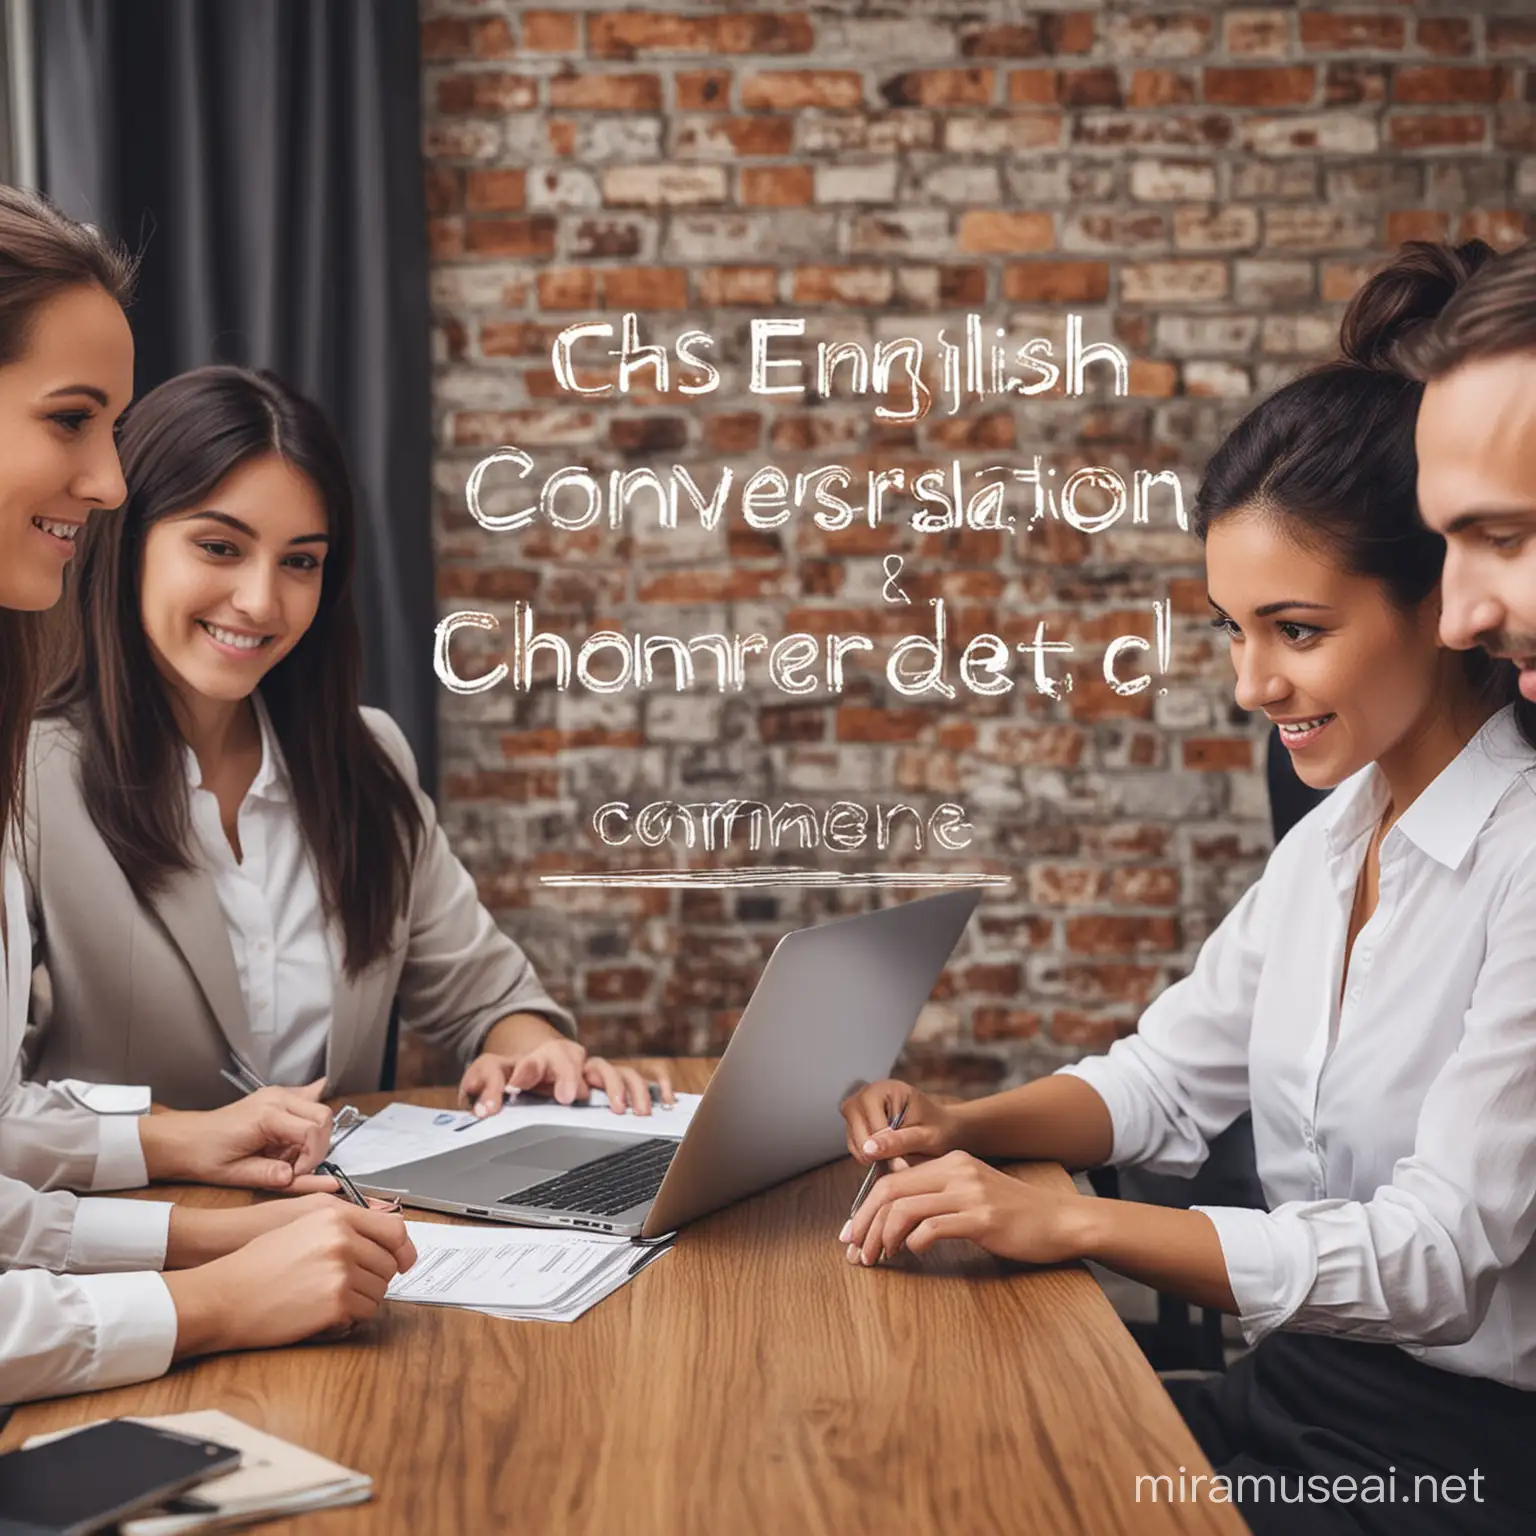 Engaging English Classroom with Interactive Business Activities